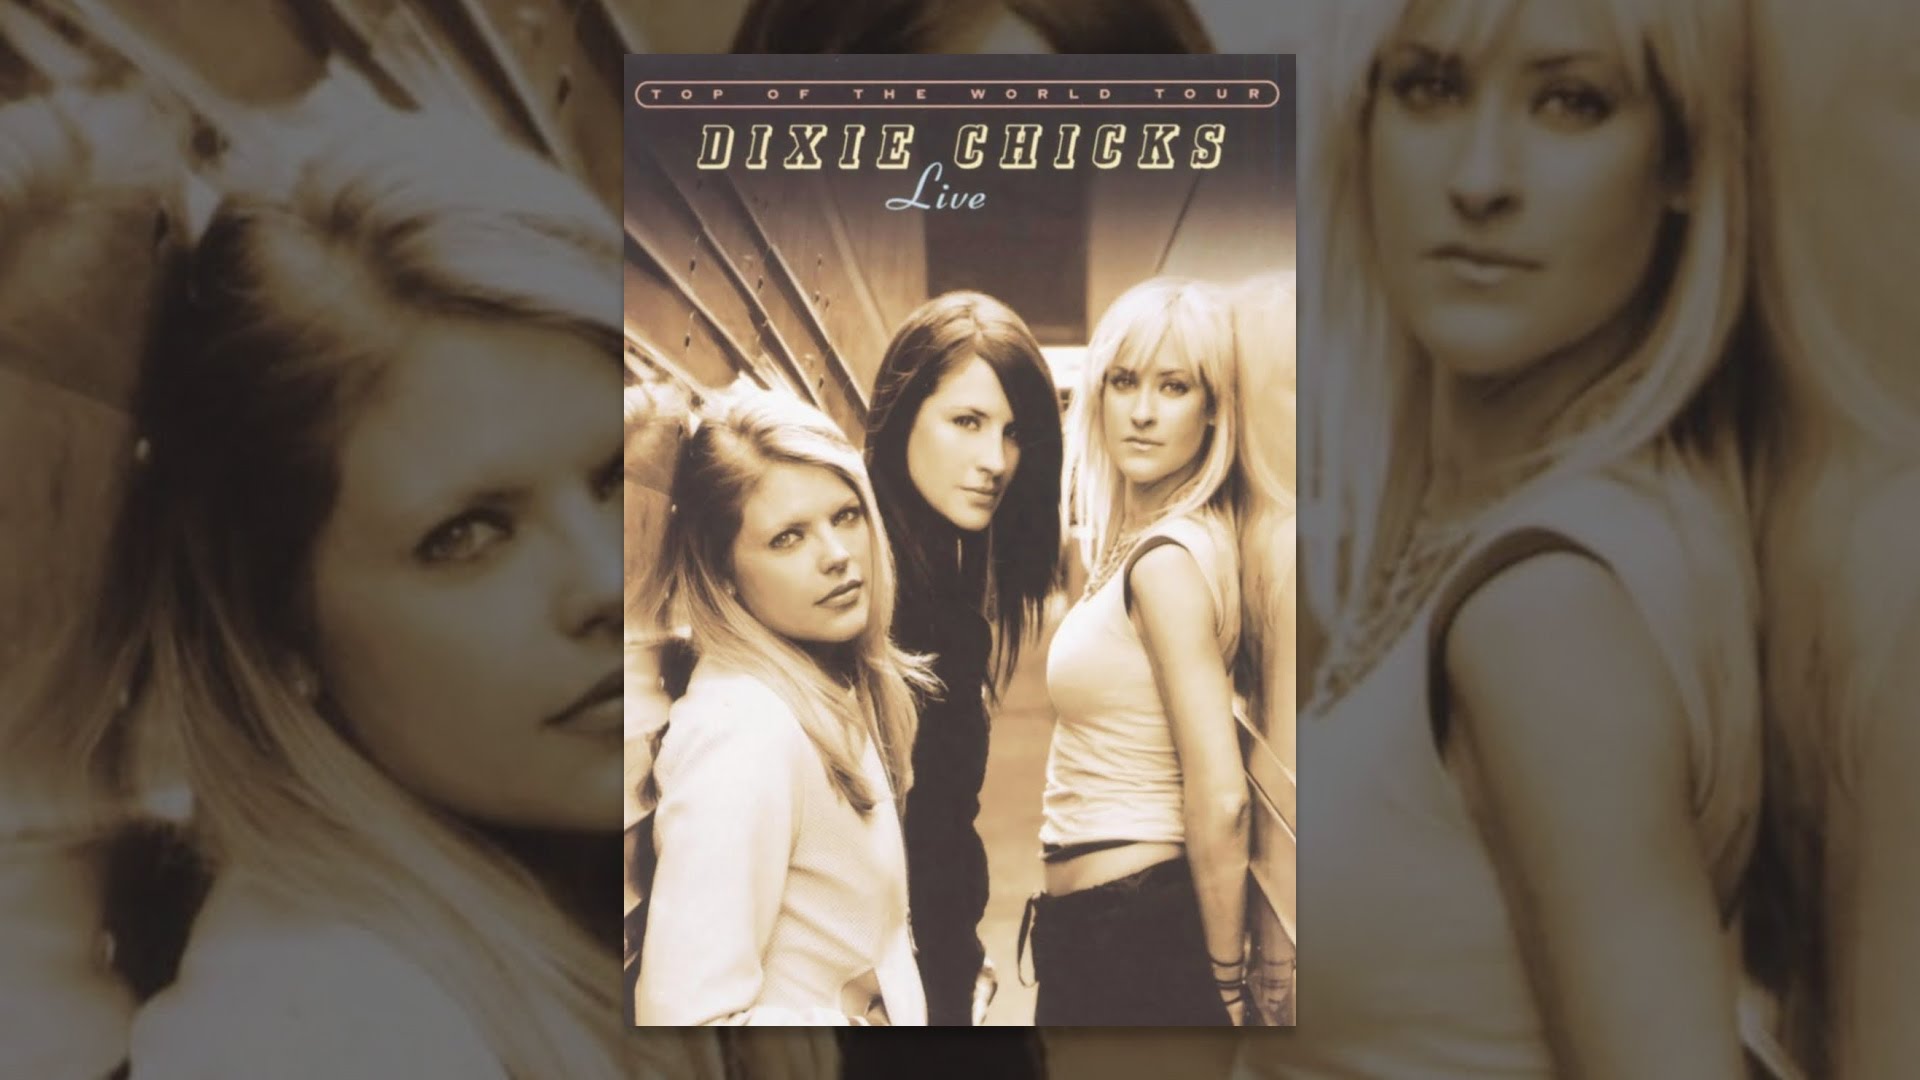 dixie chicks top of the world tour live 2003